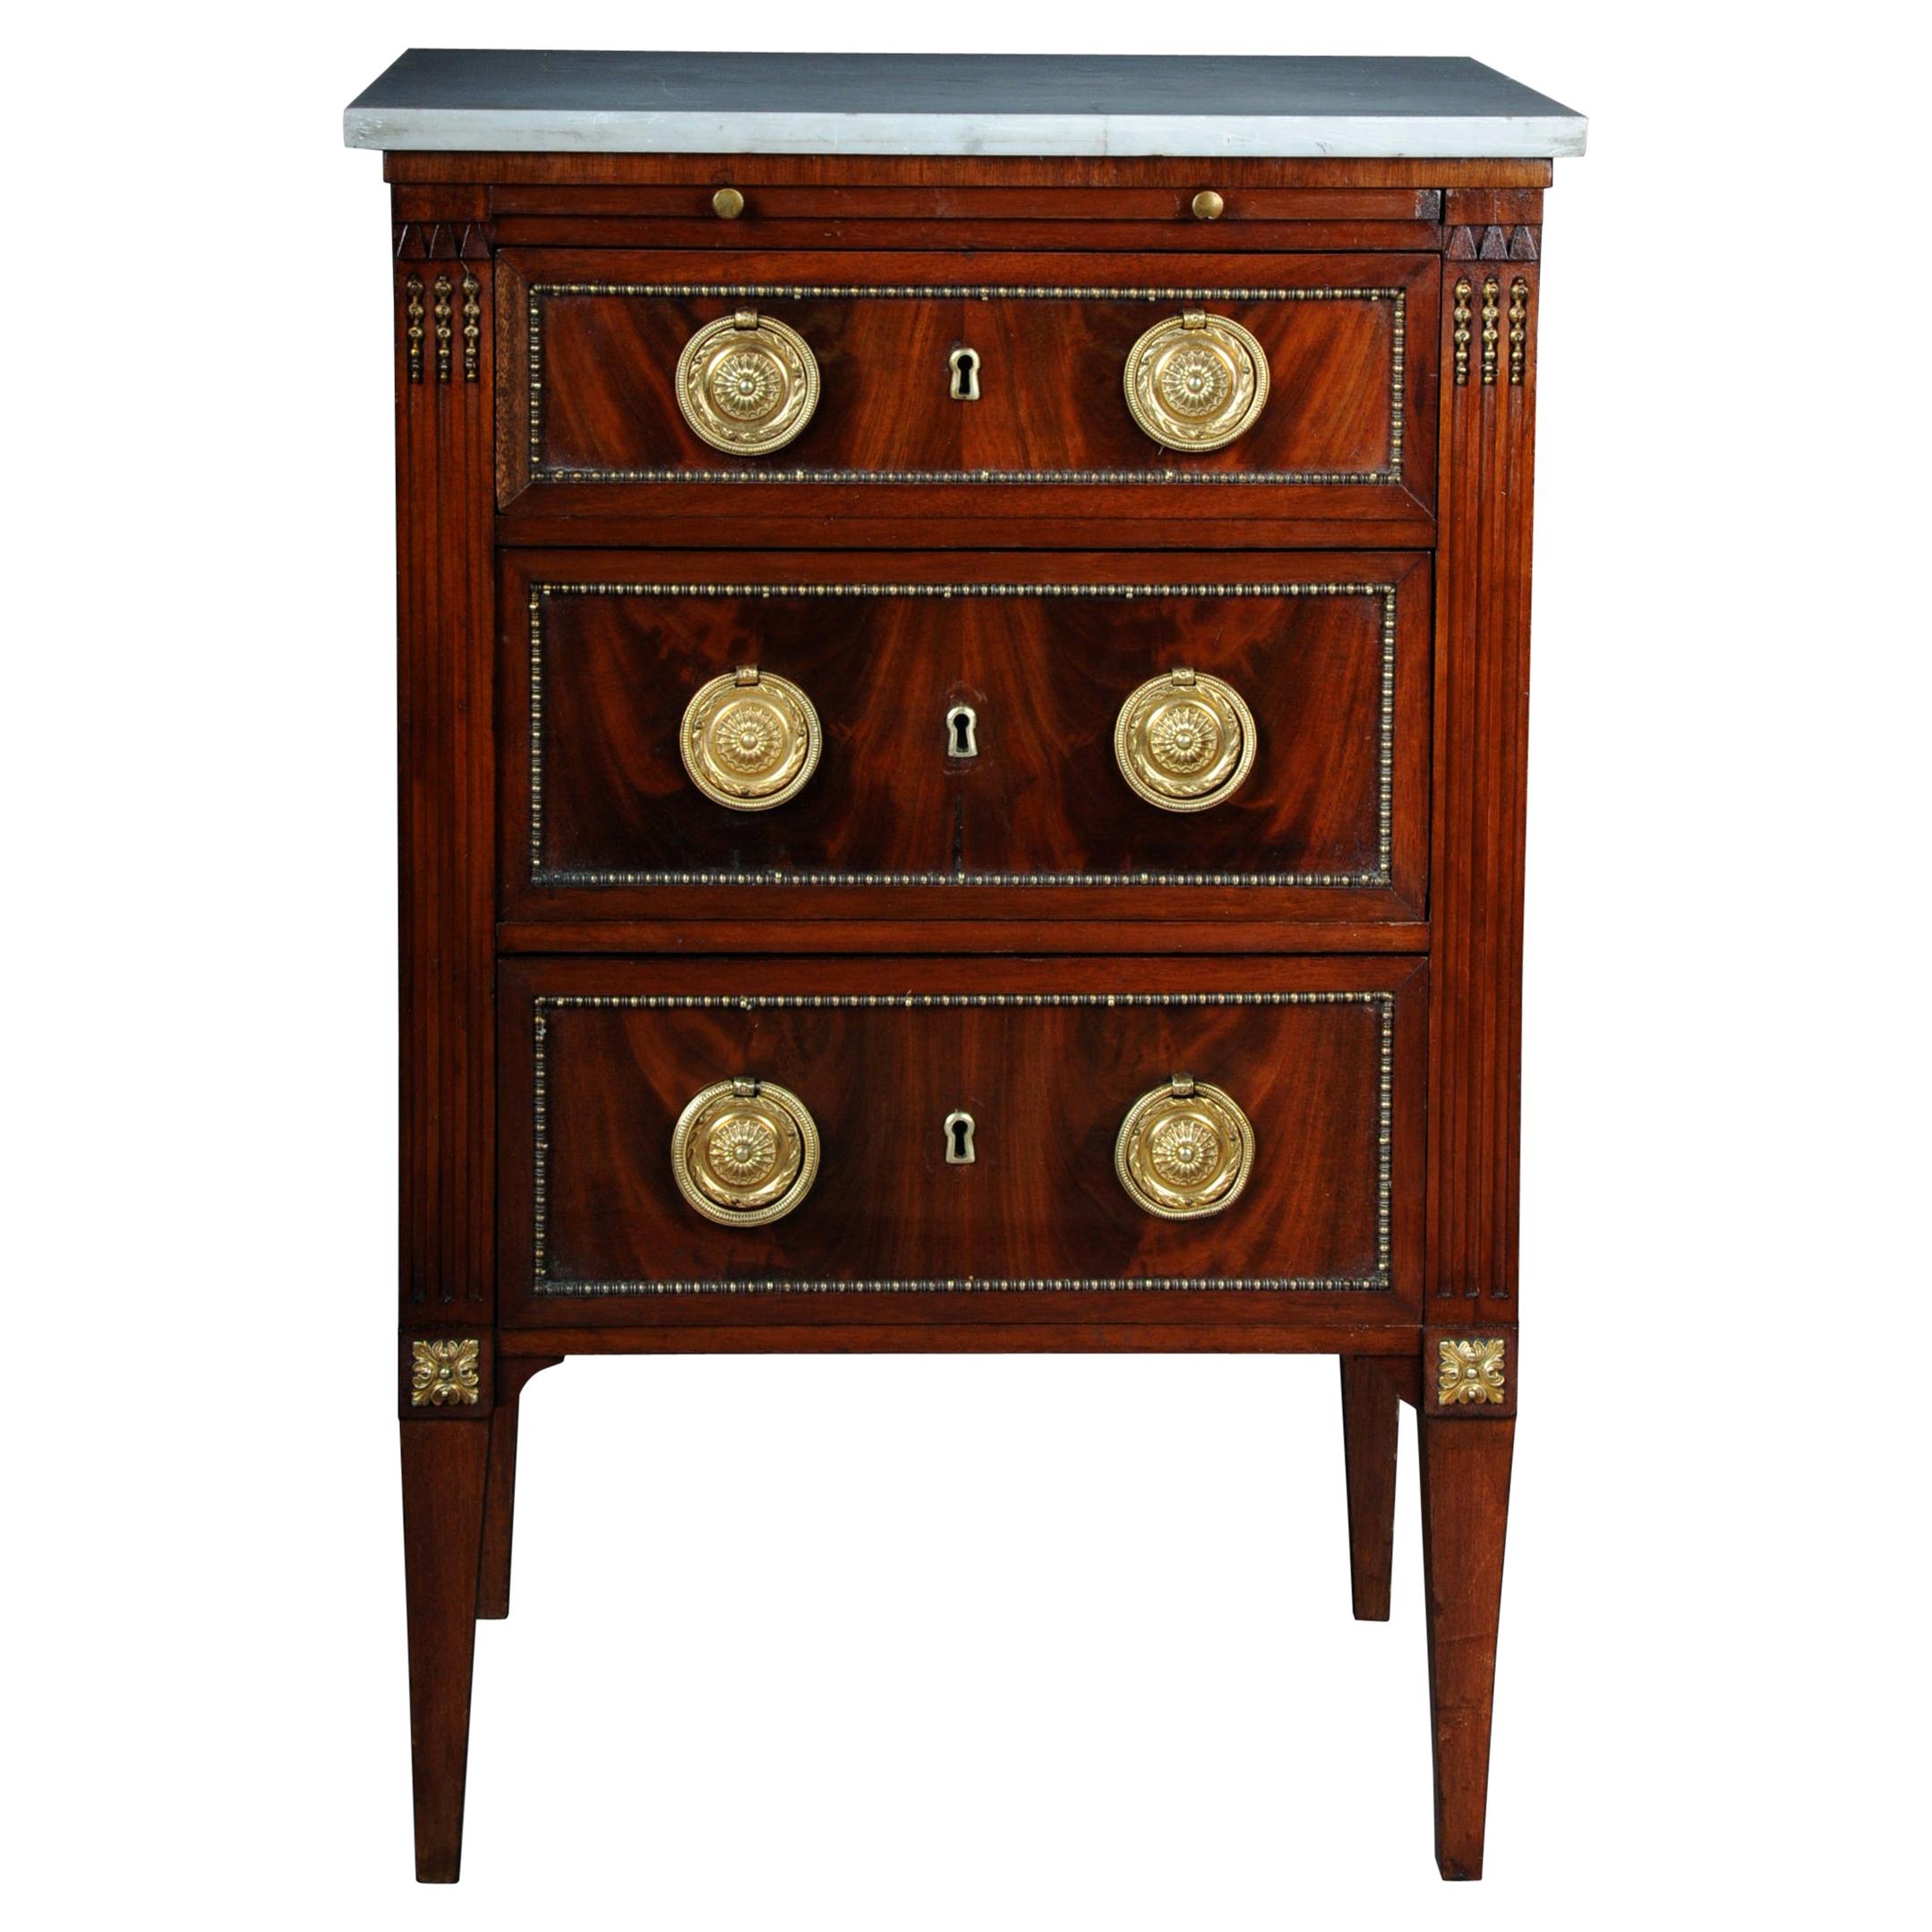 19th Century Classicism Chest of Drawers Louis XVI